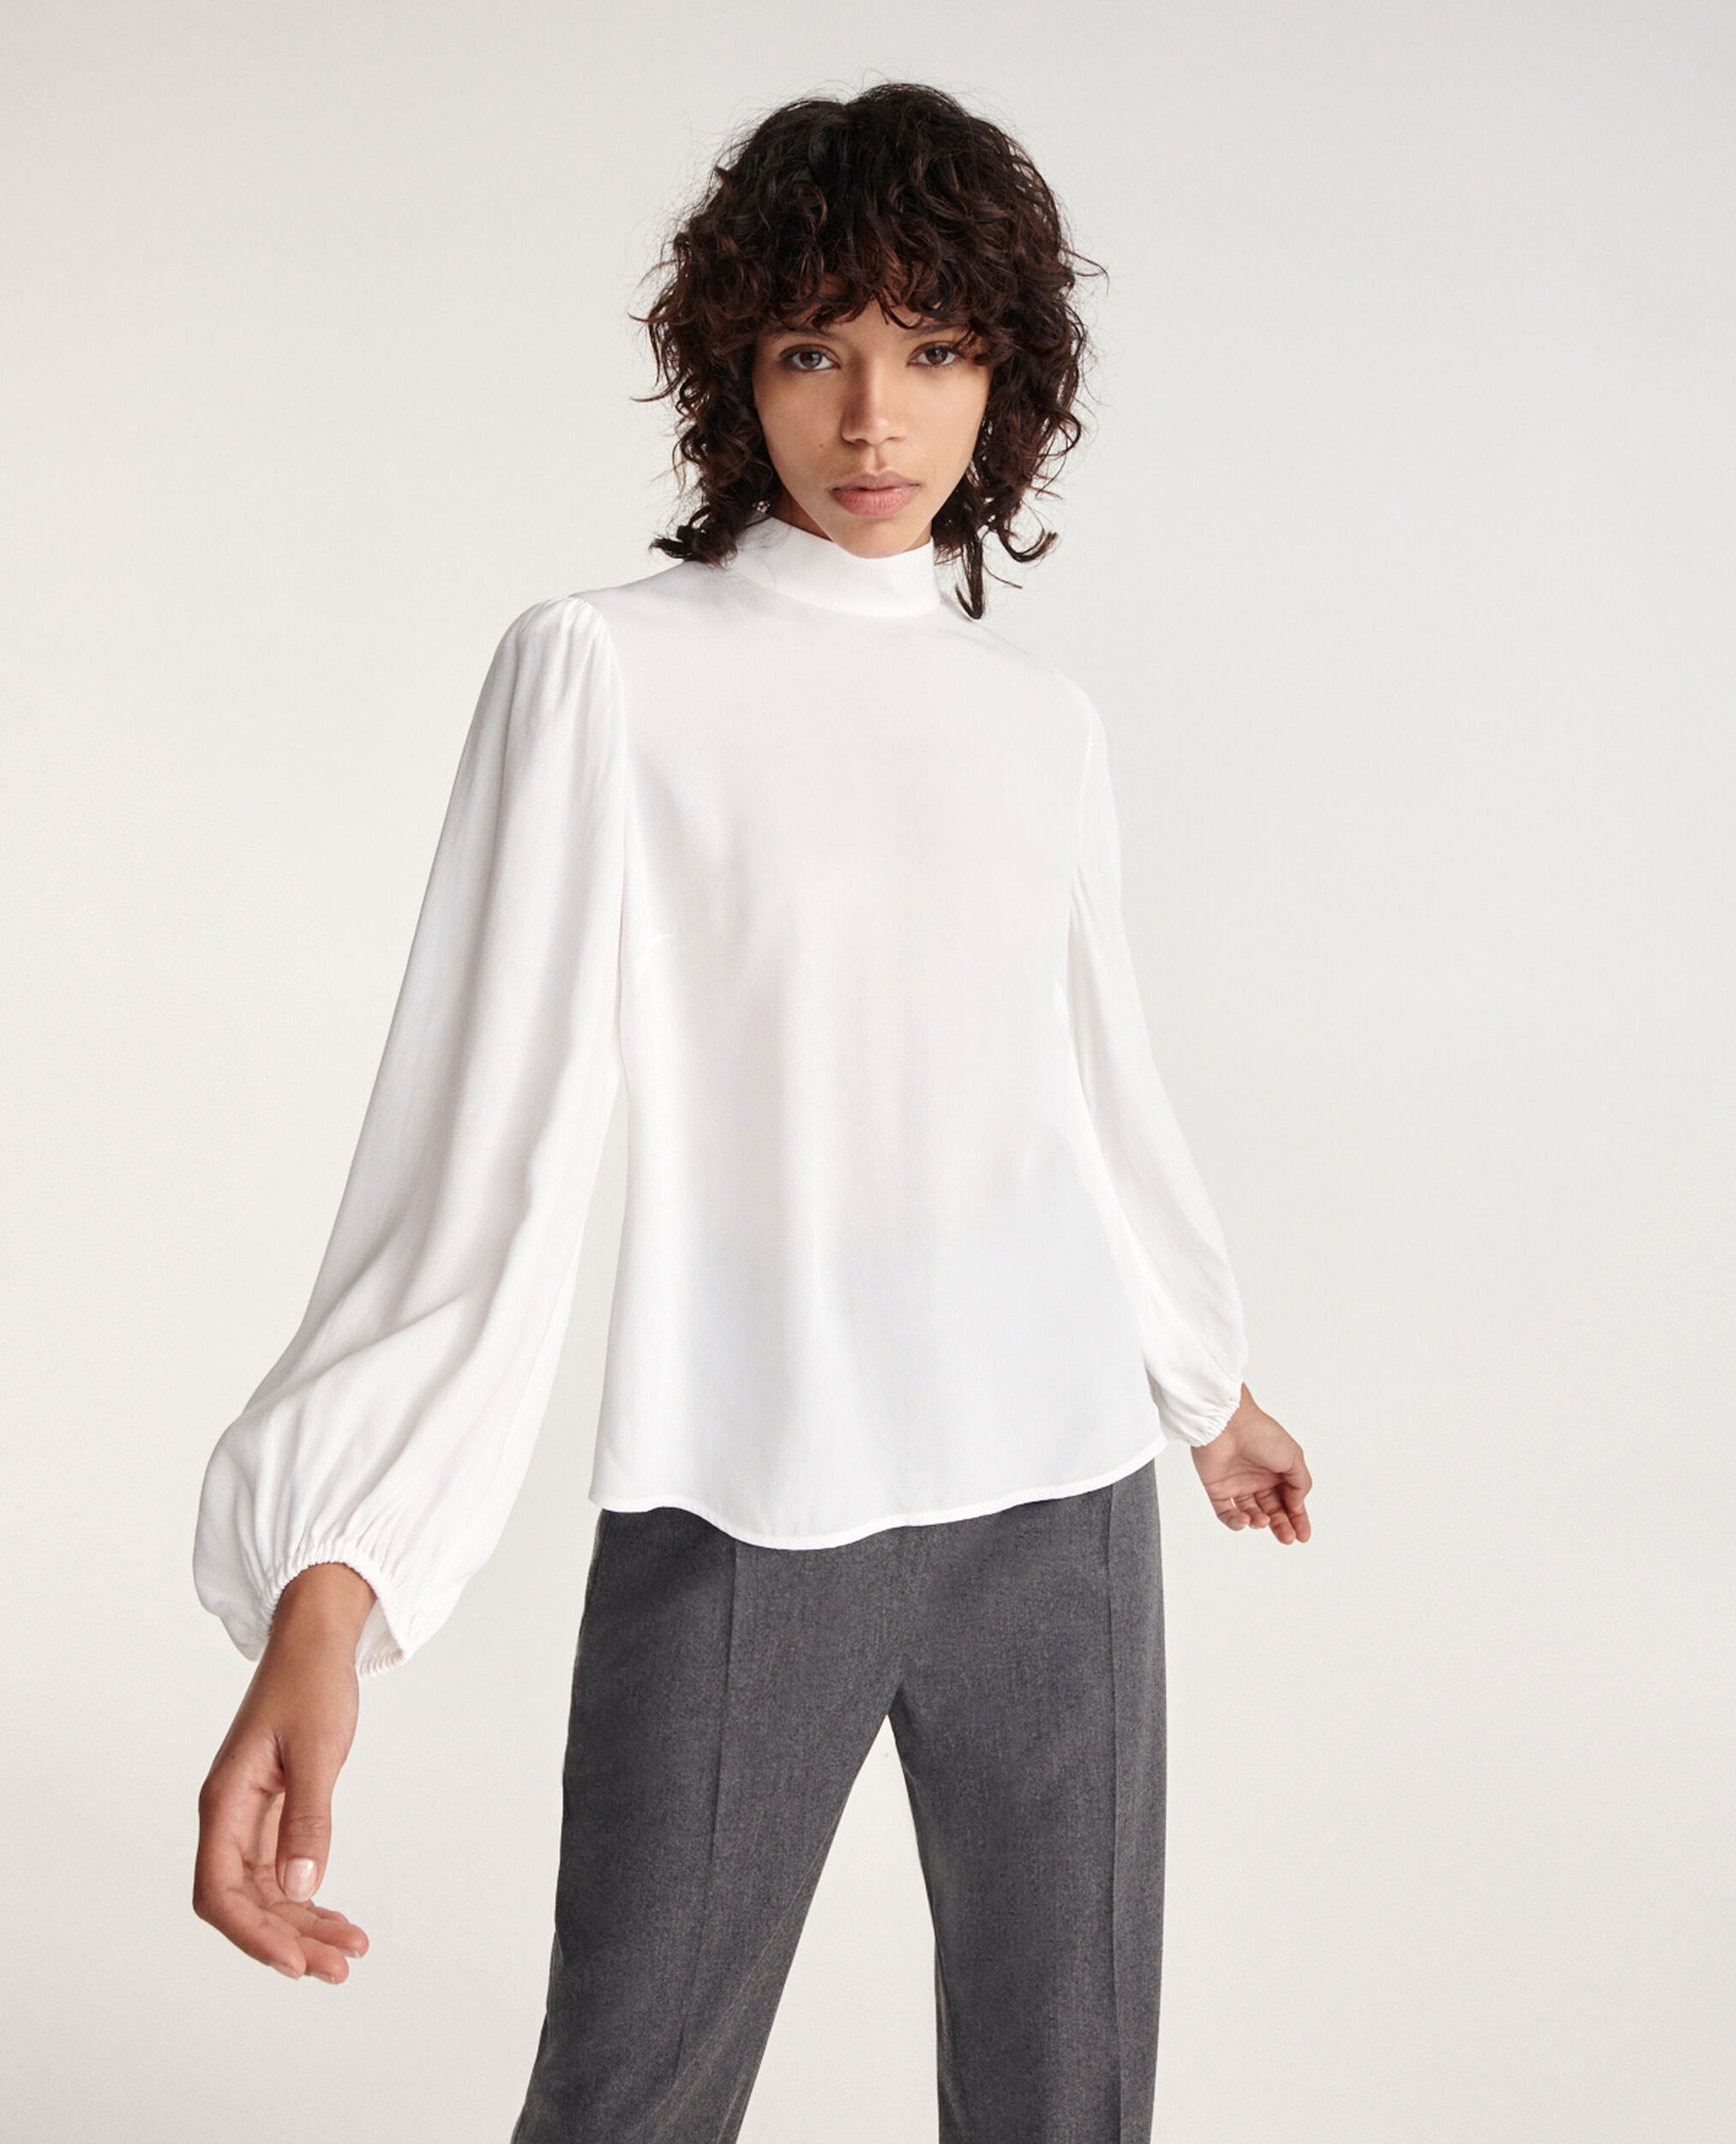 Flowing white top with high neck, WHITE, hi-res image number null